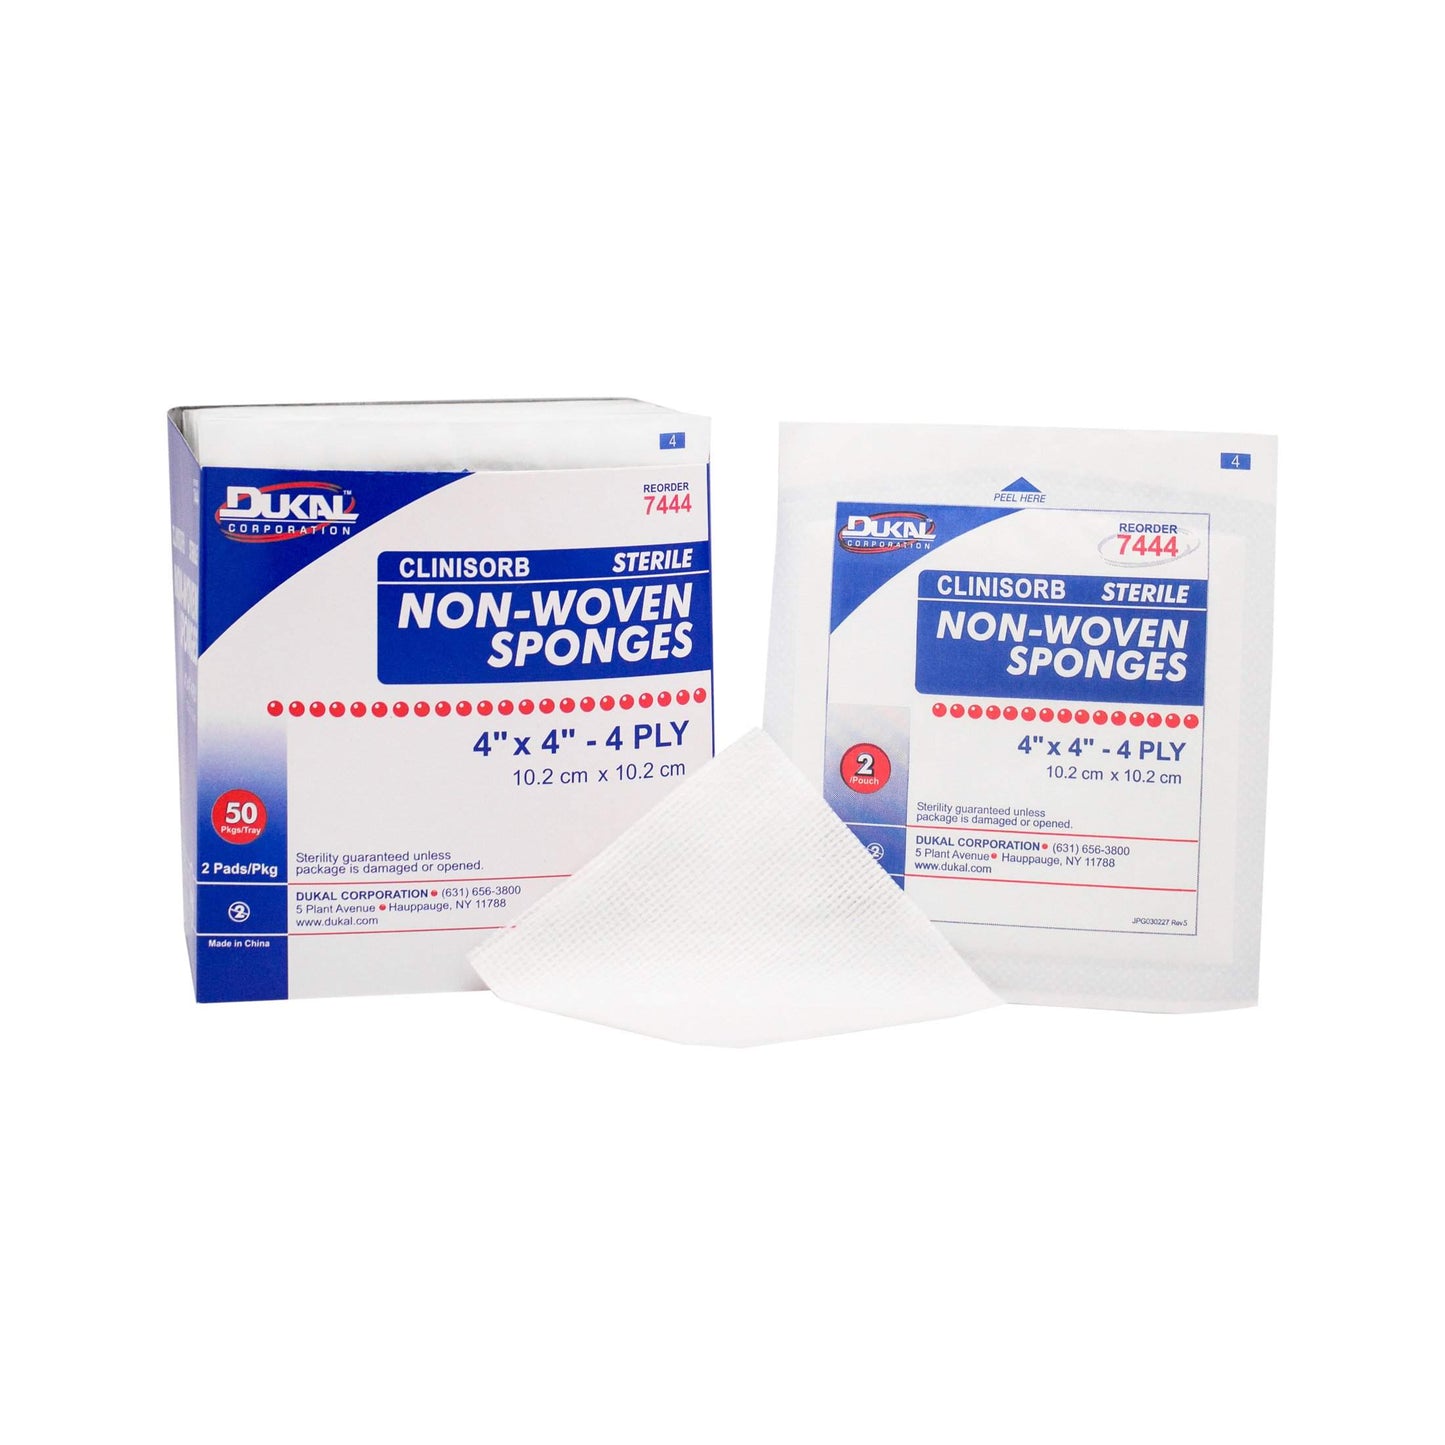 Dukal 7444 Clinisorb Non-Woven Sponges 4-Ply 4 Inch x 4 Inch; Sterile (Pack of 50 x 2)-Dukal-Brand_Dukal/ Dawn Mist,Collection_Lifestyle,Dukal_Gauze,Dukal_Medical,Dukal_Surgical,Life_Medical